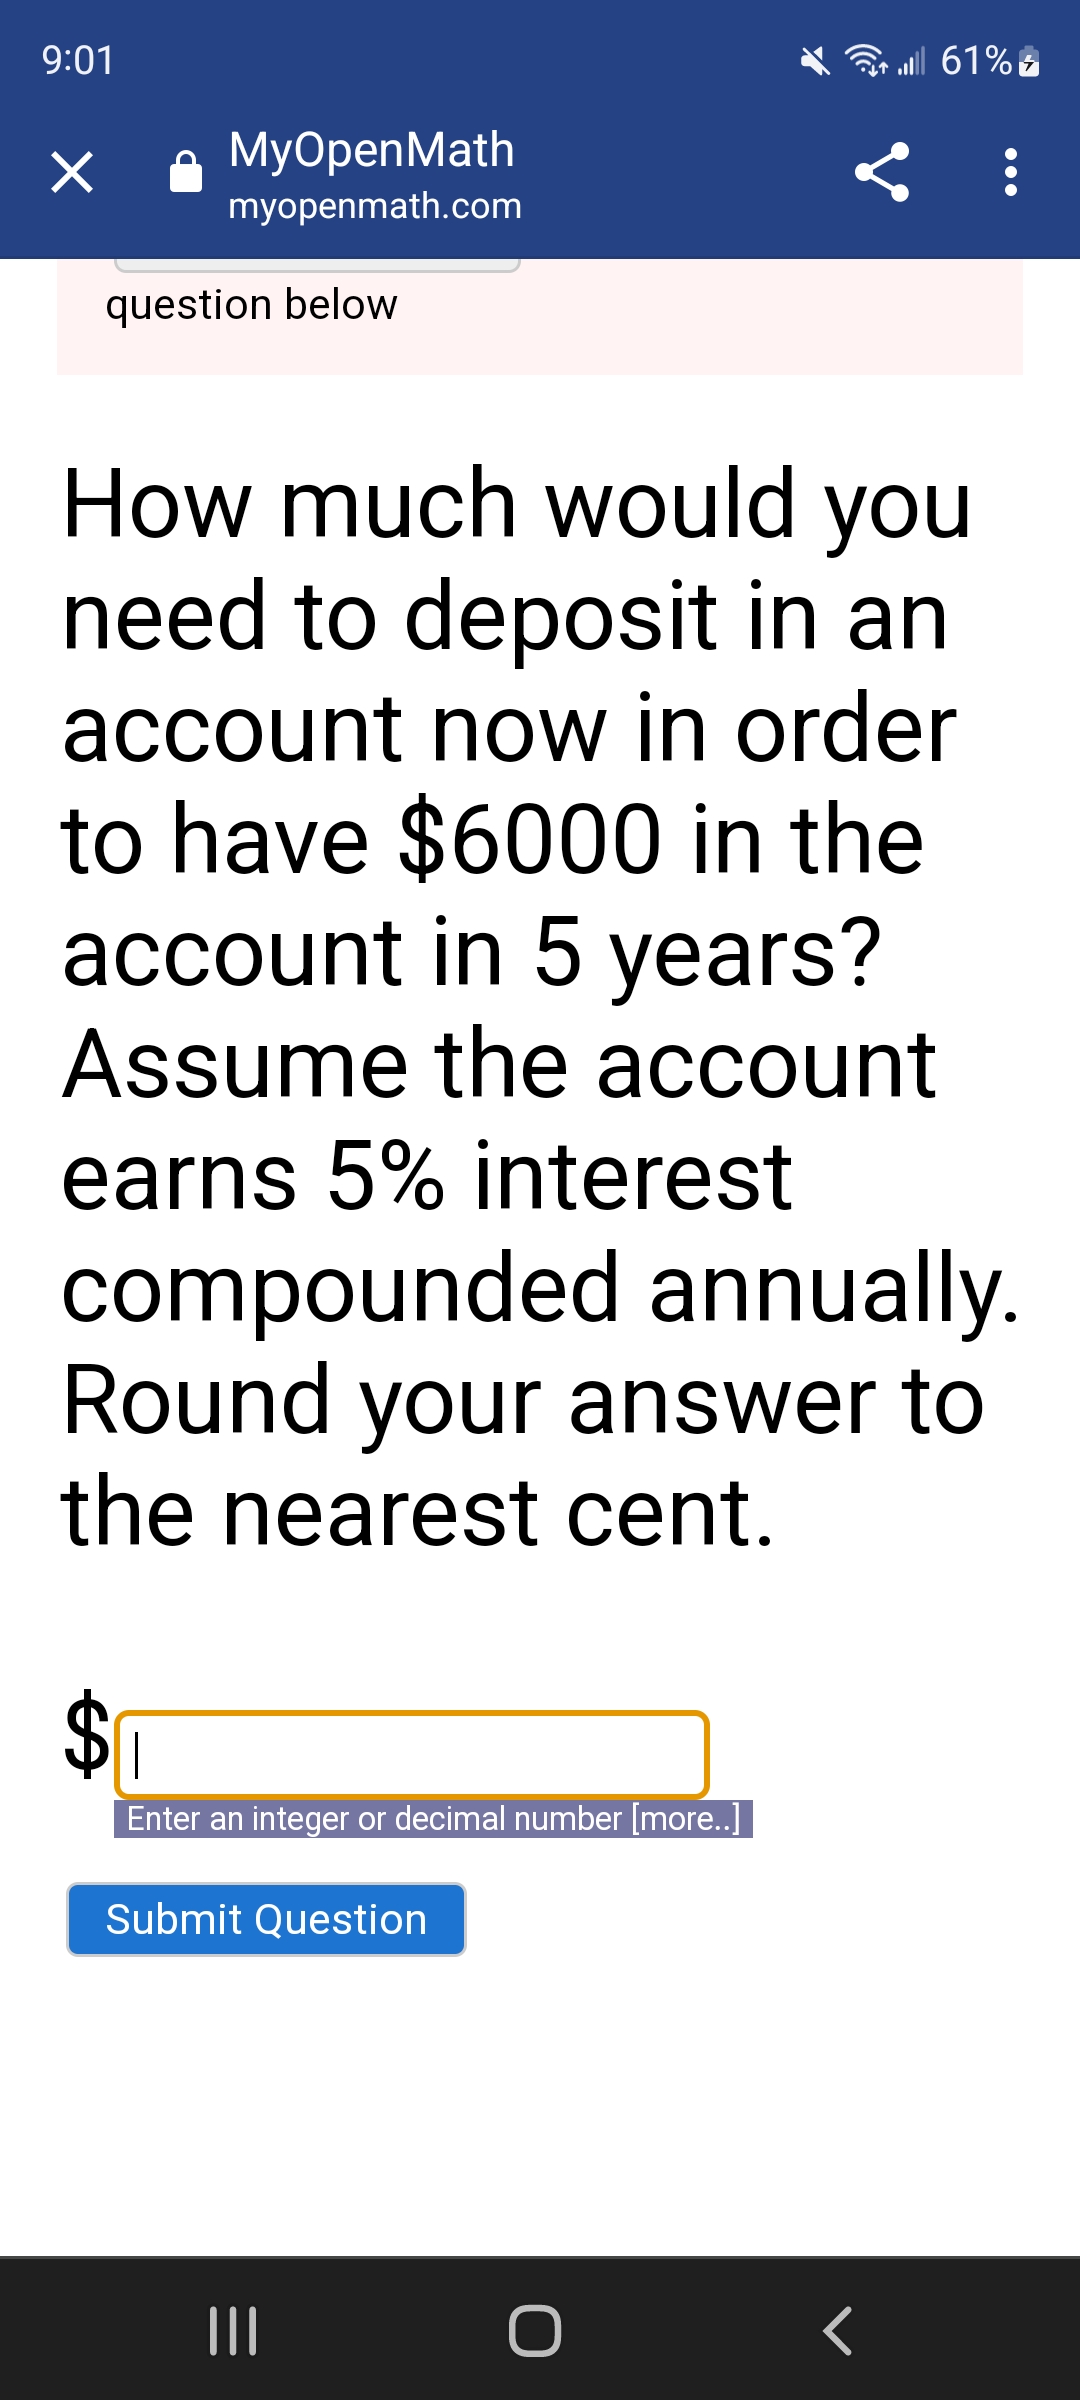 9:01
×
MyOpenMath
myopenmath.com
question below
How much would you
need to deposit in an
account now in order
to have $6000 in the
account in 5 years?
Assume the account
earns 5% interest
compounded annually.
|
Enter an integer or decimal number [more..]
<
Round your answer to
the nearest cent.
Submit Question
O
| 61%5
<